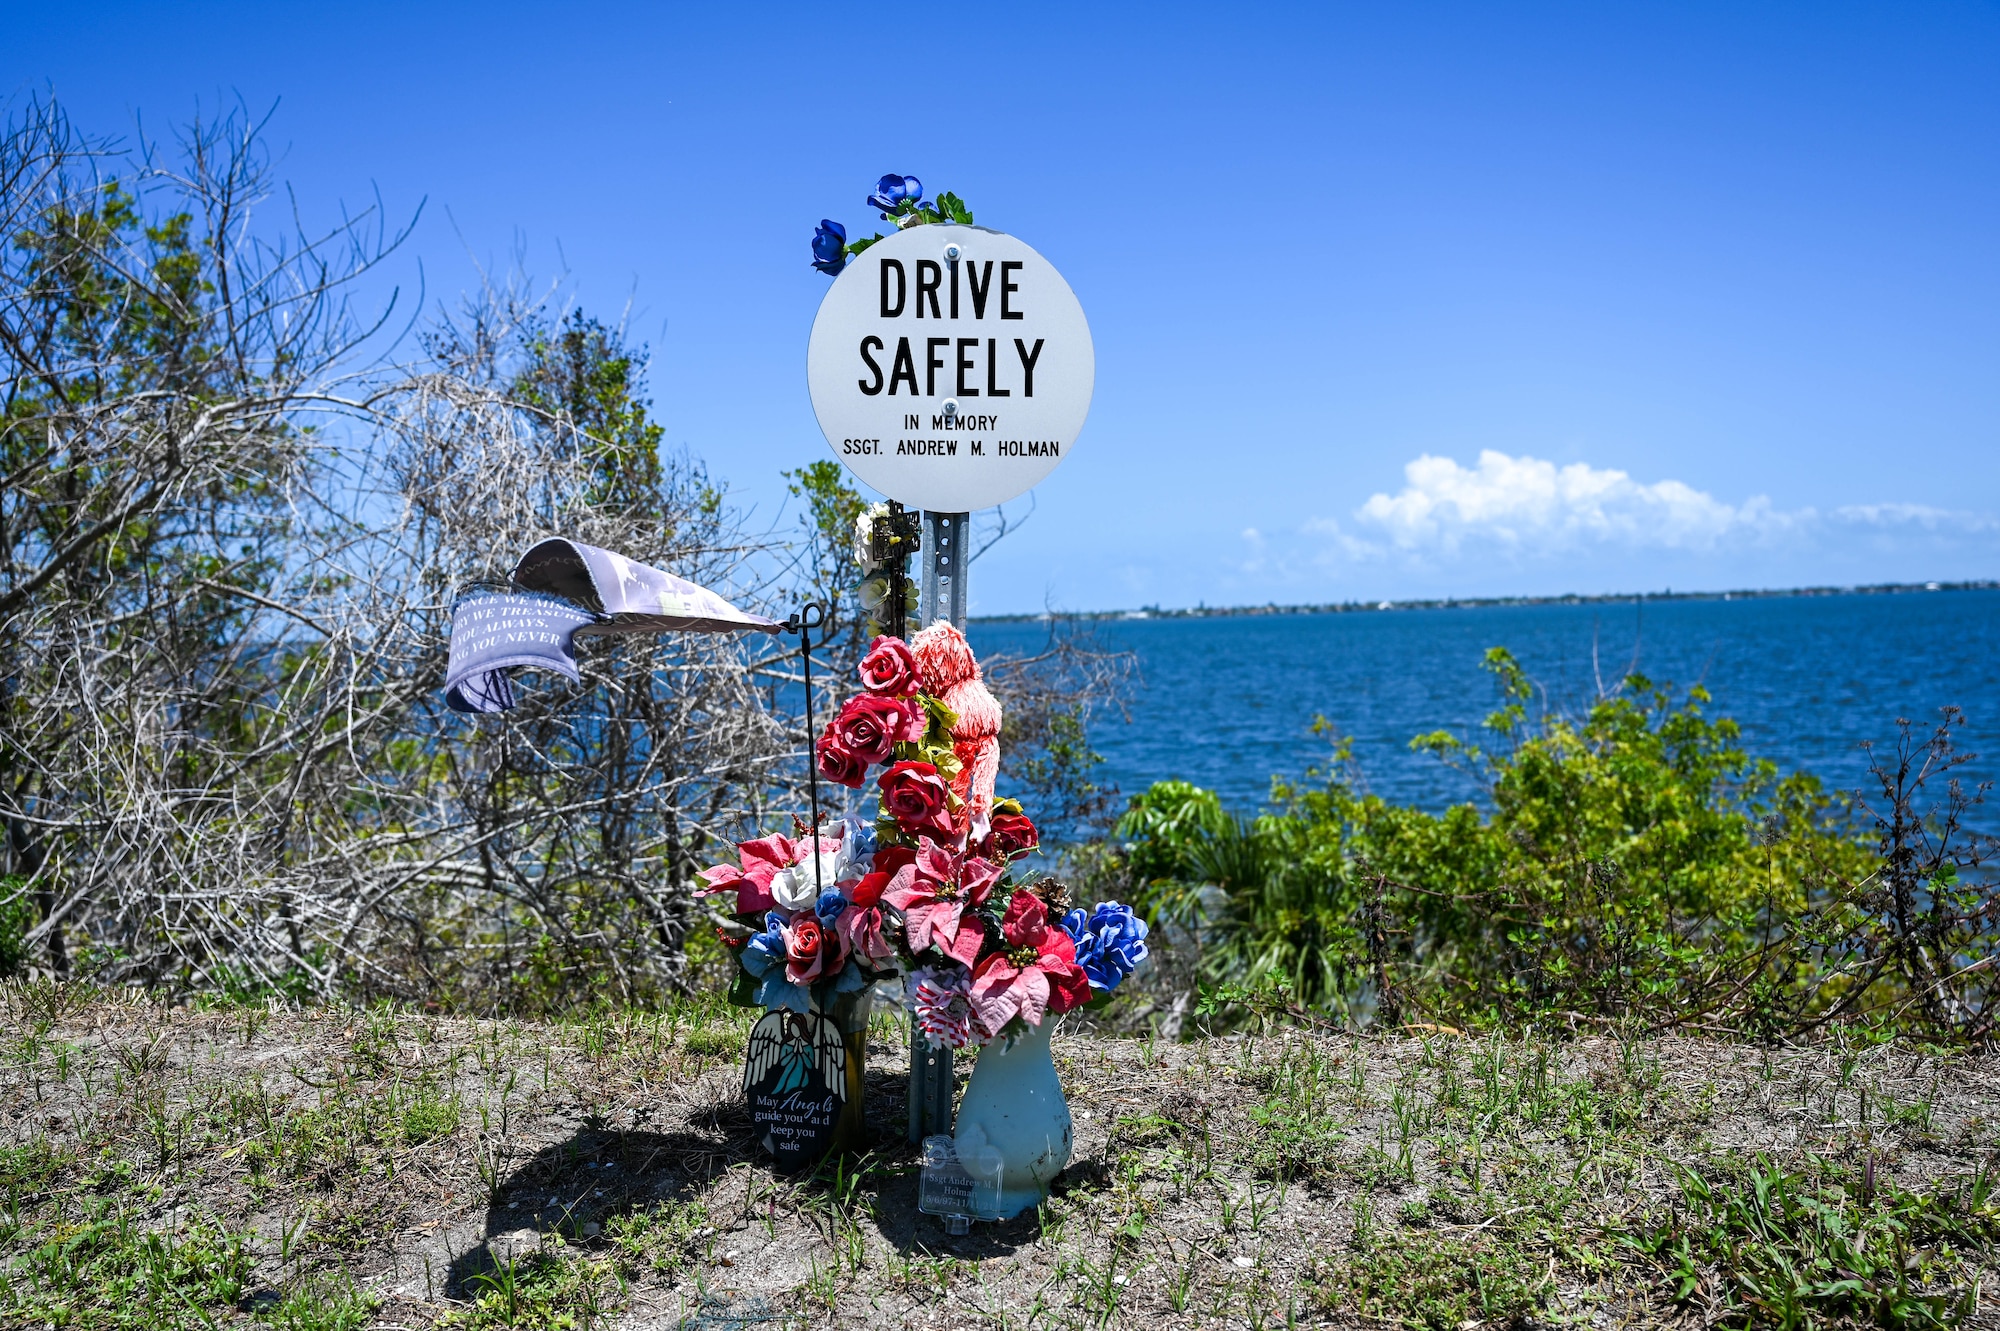 Memorial Marker for Staff Sgt. Andrew Holman, 45th LRS air traffic controller April 21, 2023 in Melbourne, Fla., Memorial Markers are signs posted at sites of incidents to remind others to drive safely. (U.S. Space Force photo by Senior Airman Samuel Becker)